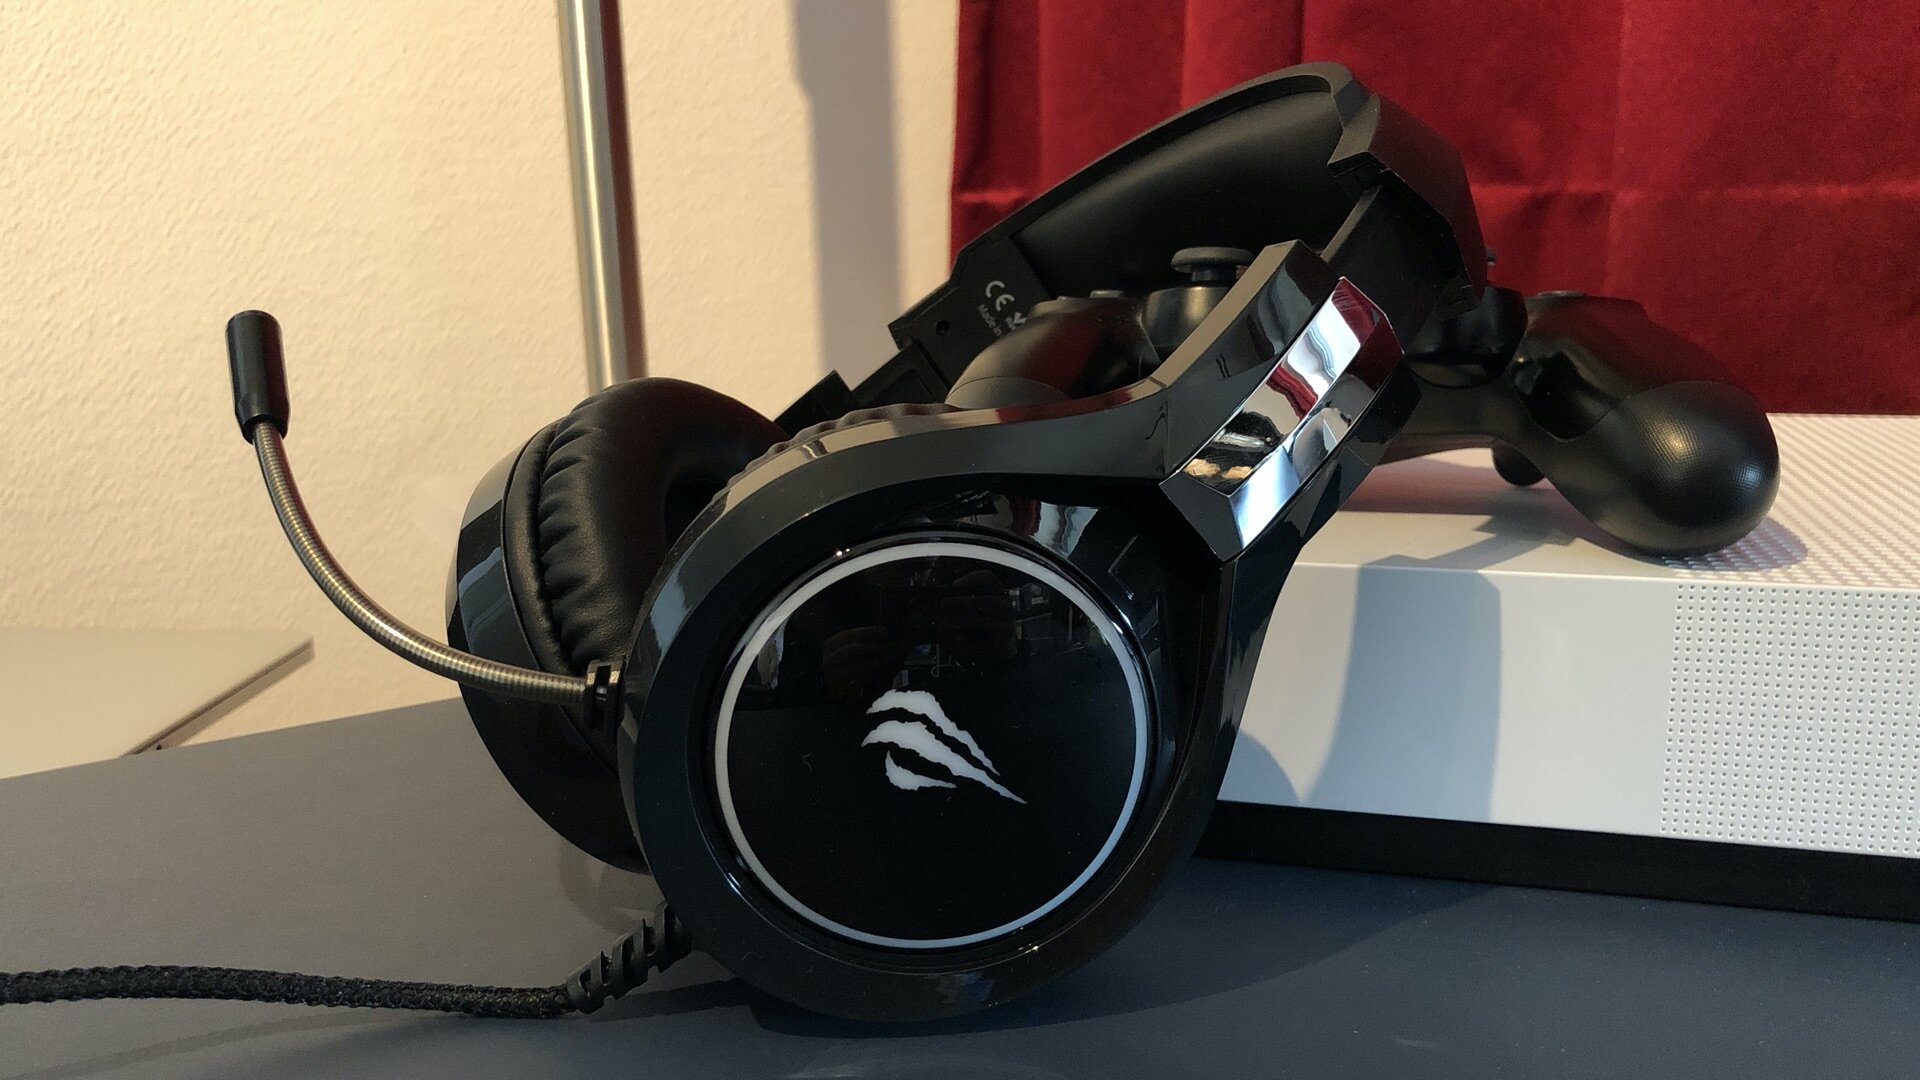 Best 2023 cheap gaming headsets from $25 to $100 - End 2022